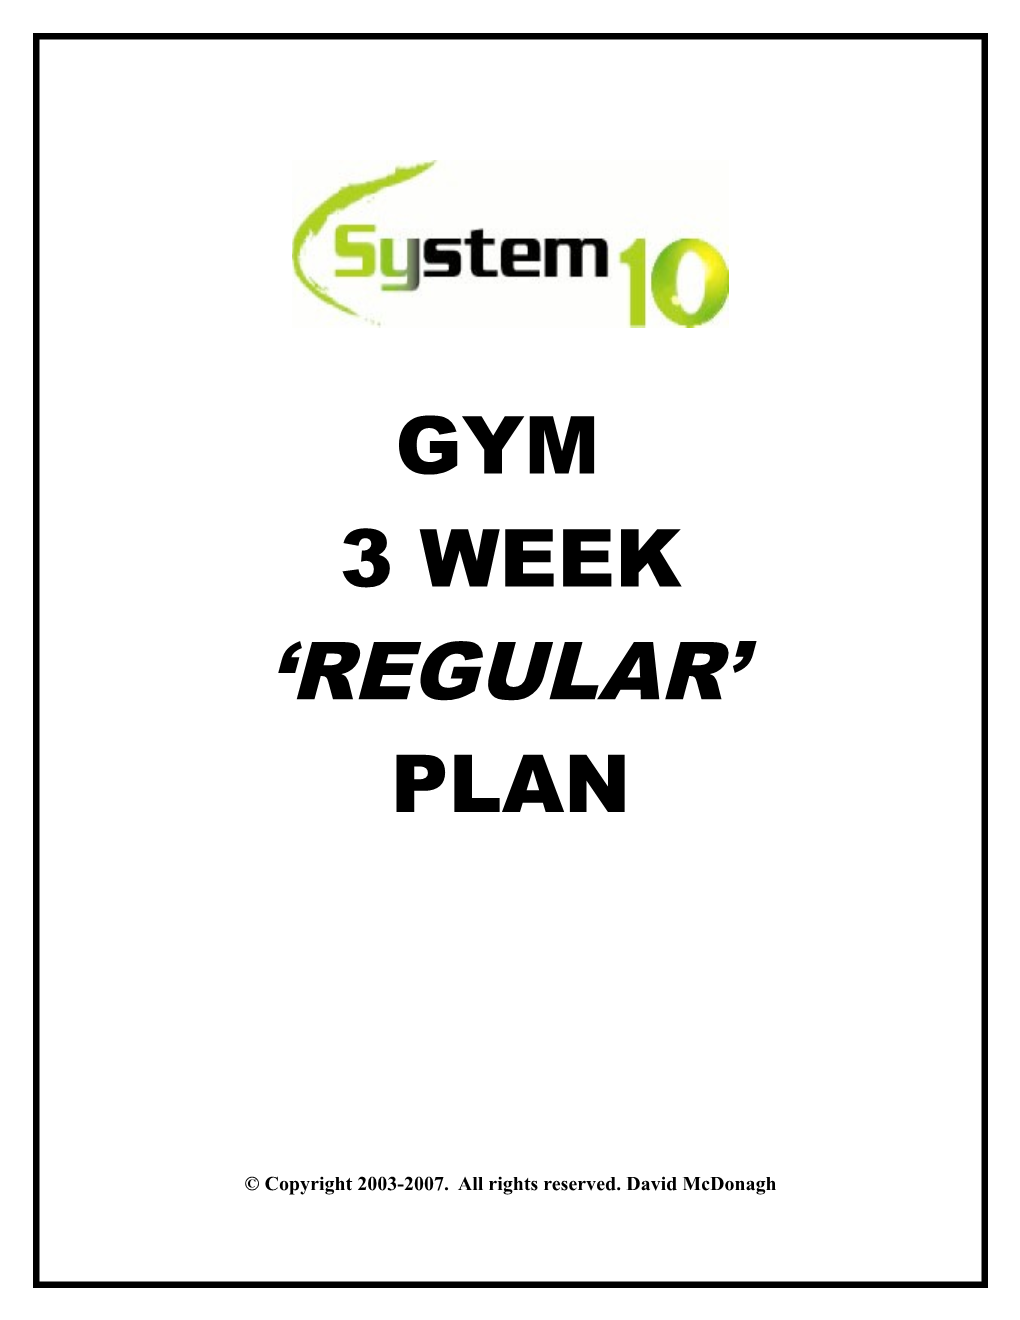 Welcome to Our System 10 Gym Plan. This Is Our3 Week REGULAR Programme